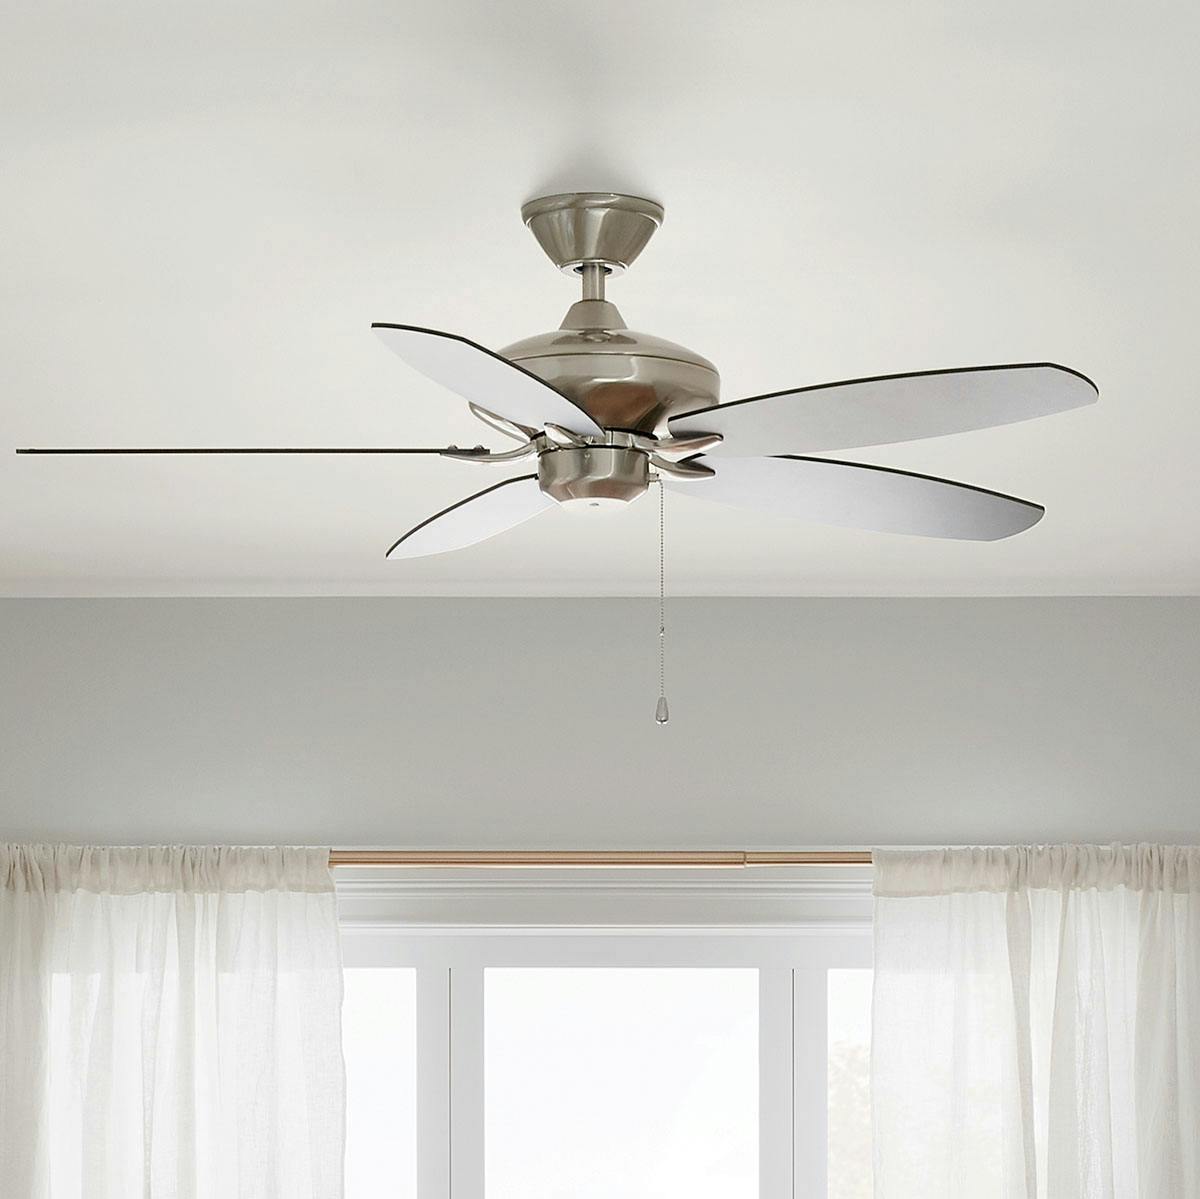 Day time living room featuring Renew ceiling fan 330160BSS